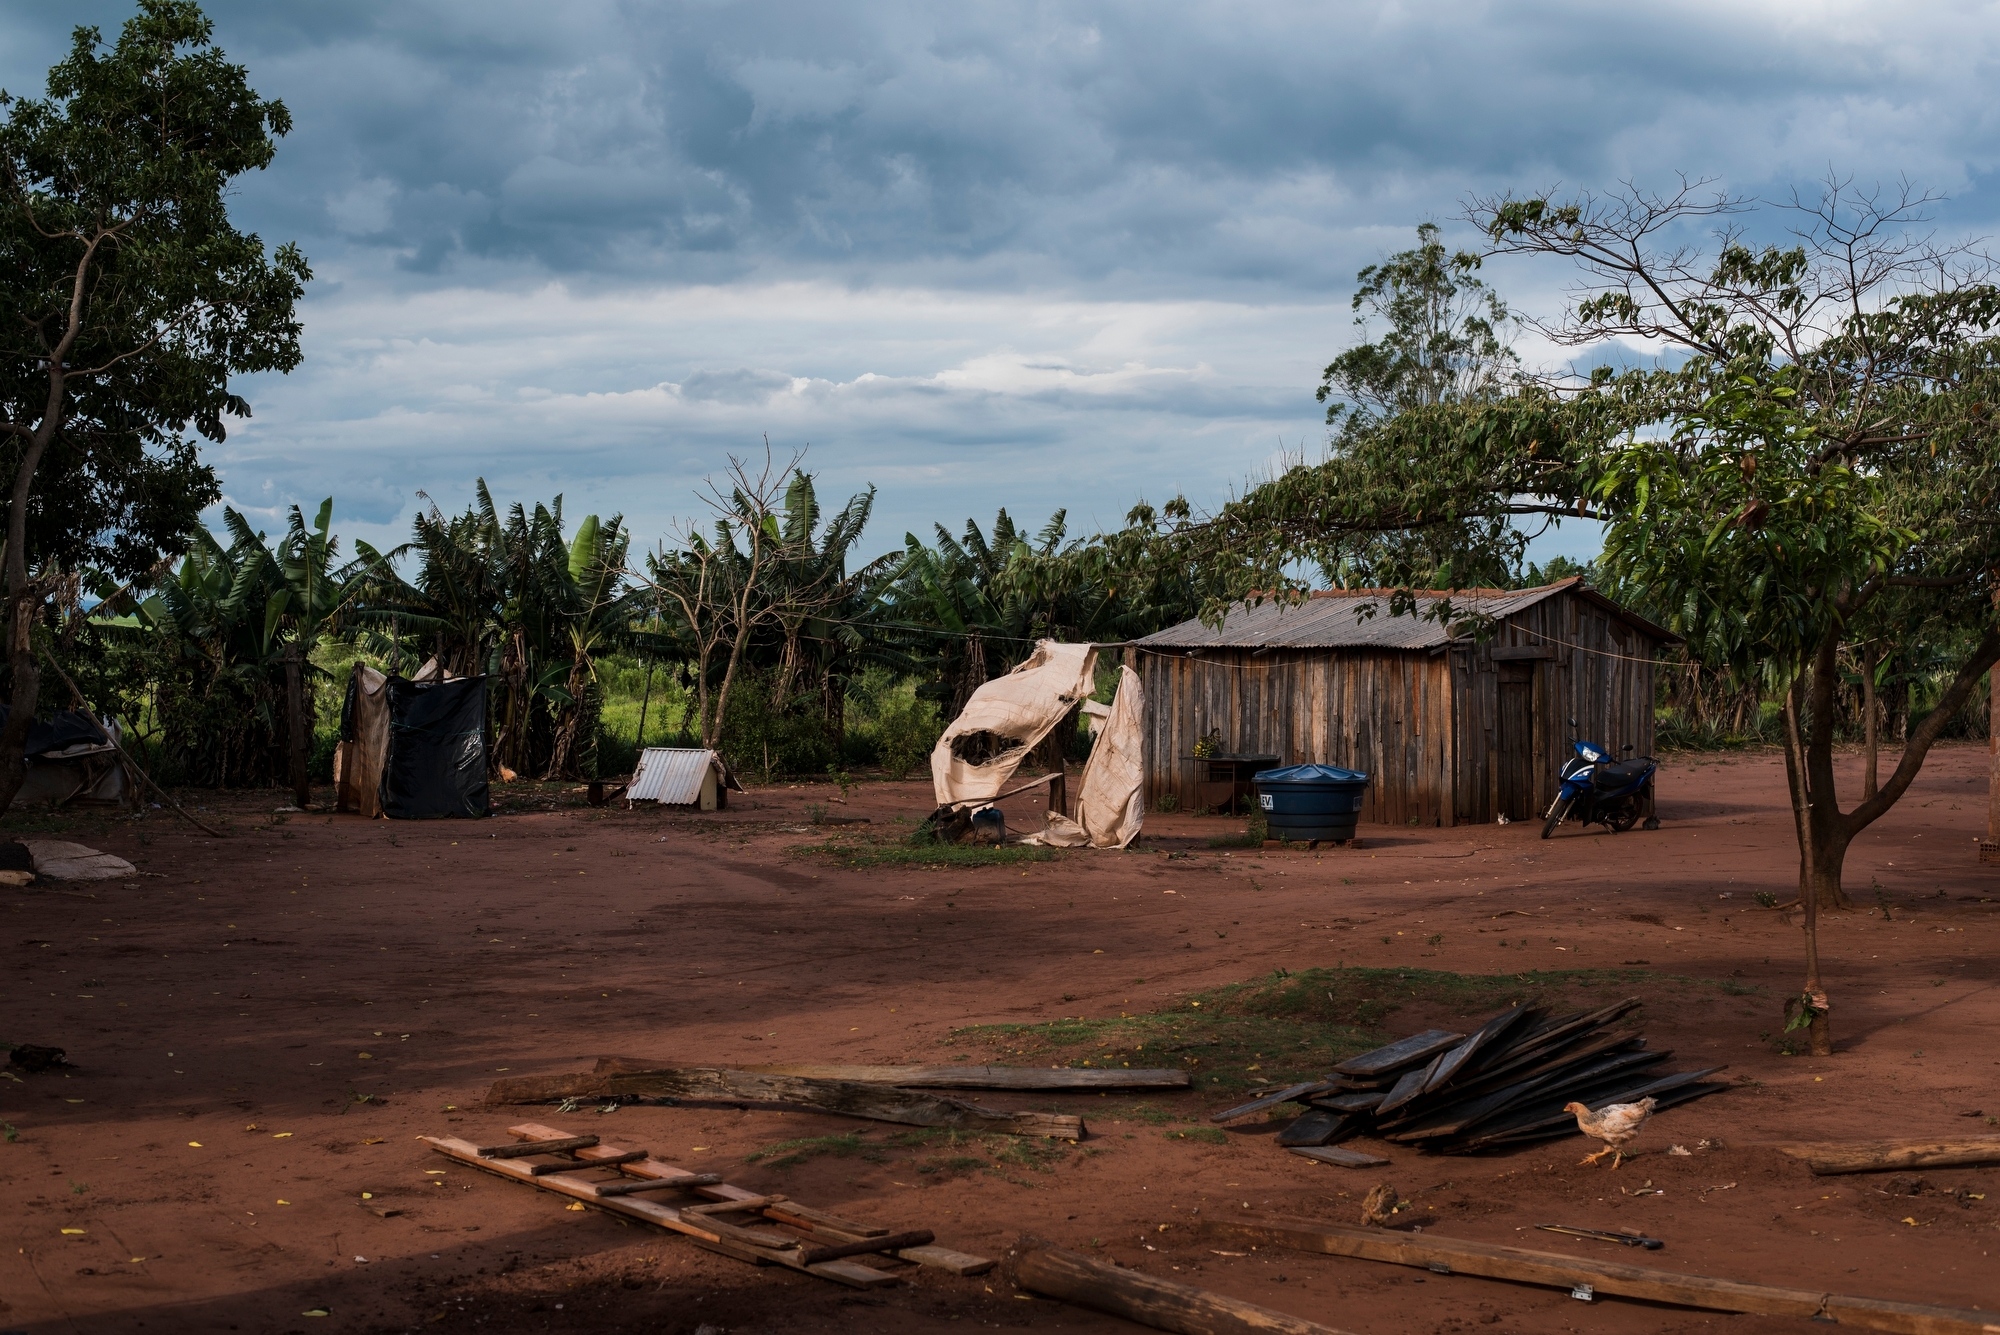 November 29, 2016.&nbsp; A yard in the Guarani-Kaiowa Amambai Indigenous Reserve in Matto Grosso Du Sul, Brazil. The reserve has one of the highest suicide rates in the world.